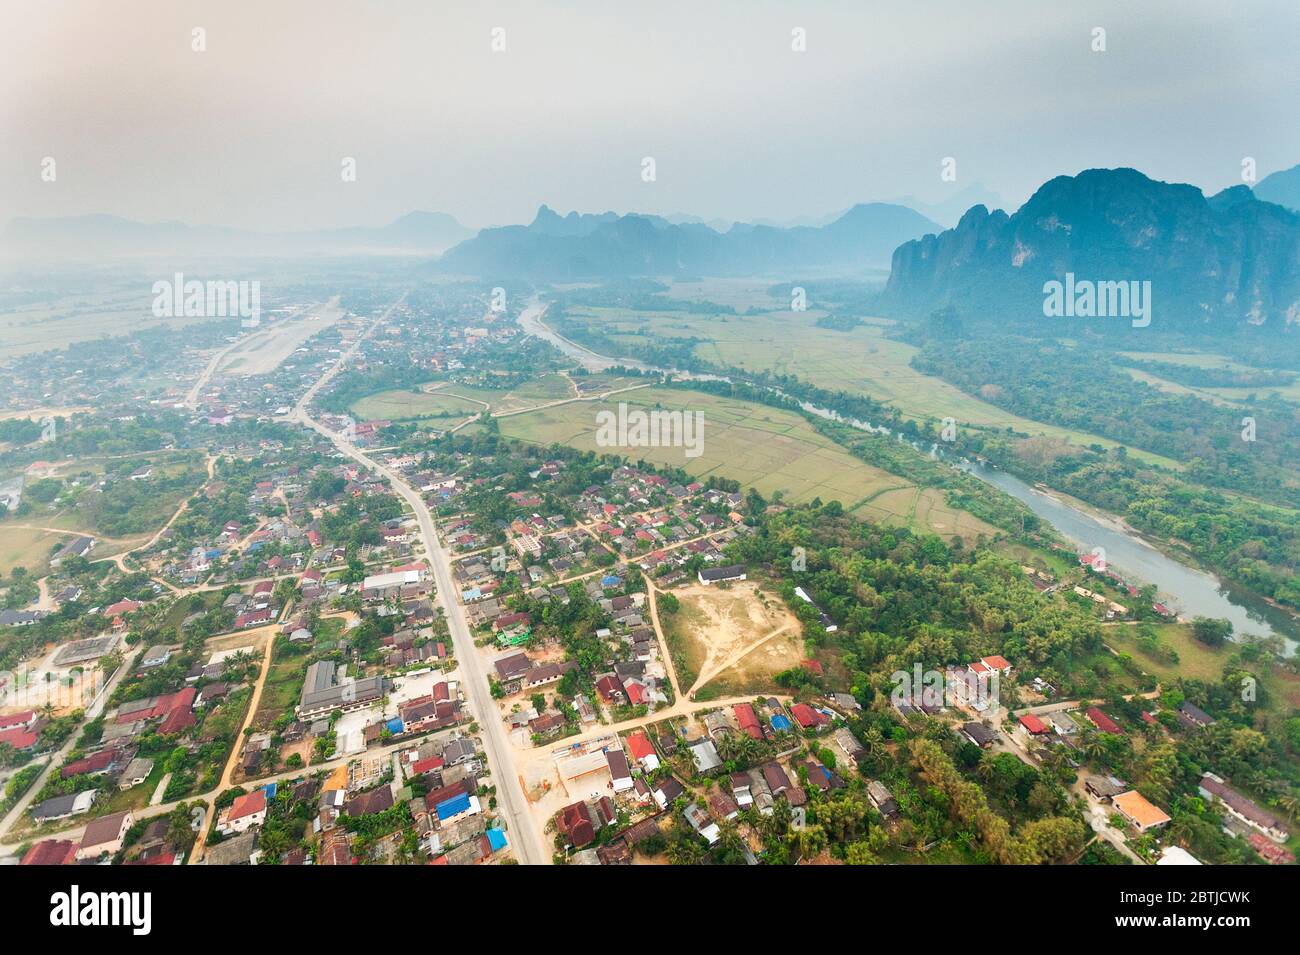 Aerial view from a Hot Air Balloon over Vang Vieng town, the Nam Song River and the  limestone mountains. Vang Vieng, Laos, Southeast Asia Stock Photo